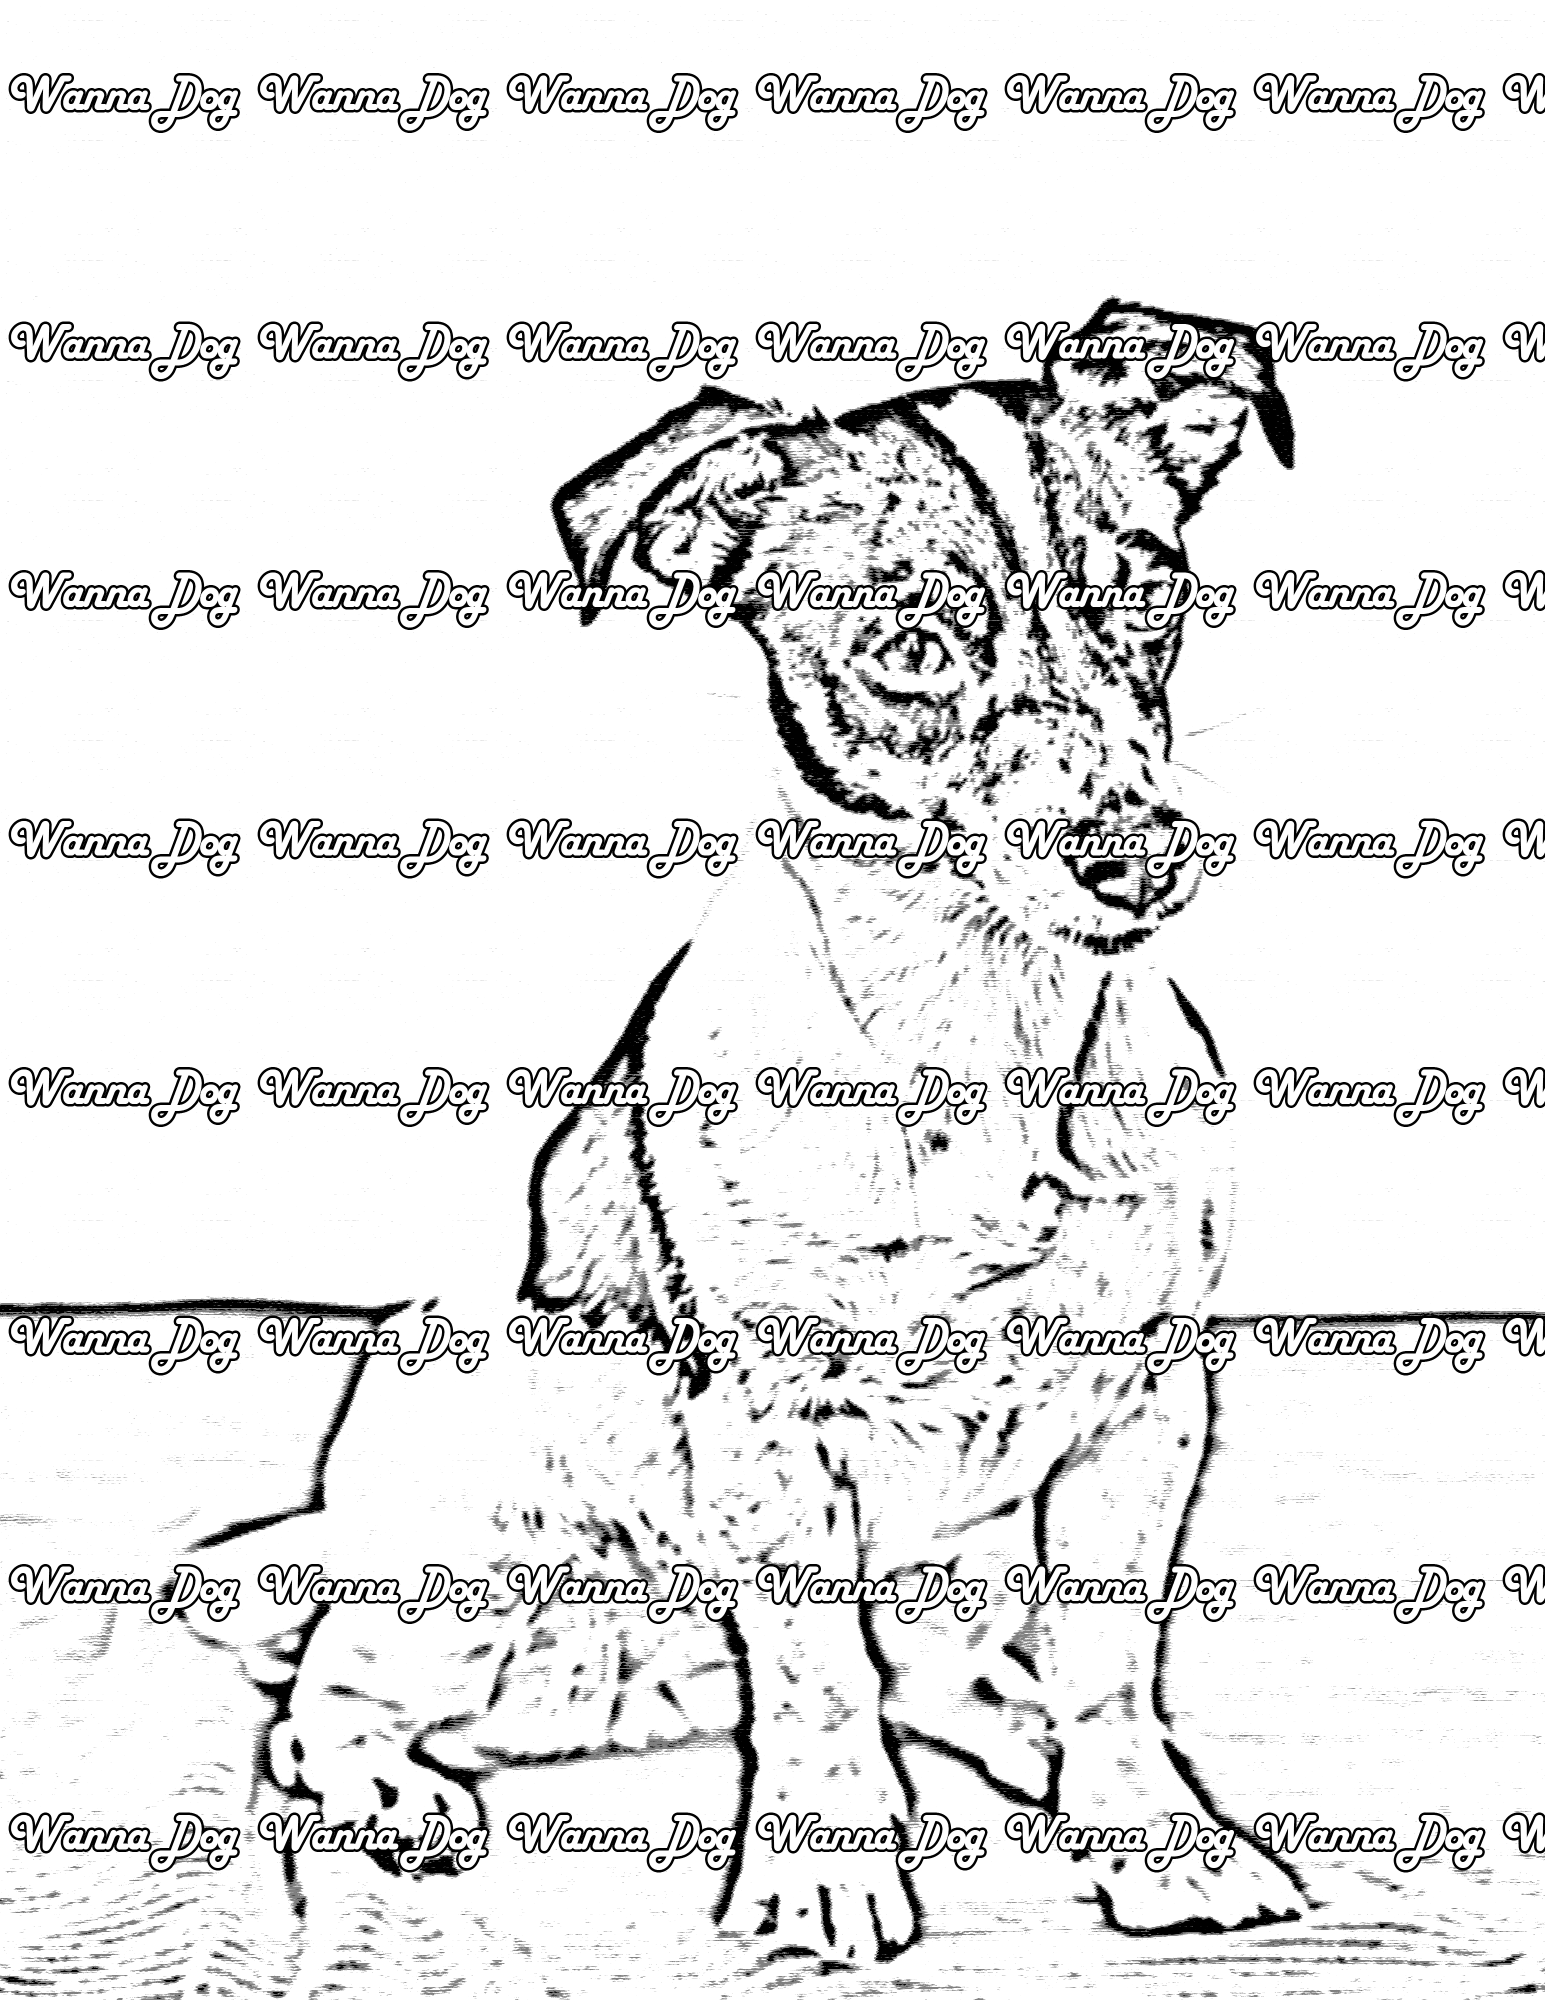 Jack Russell Terrier Coloring Page of a Jack Russell Terrier sitting